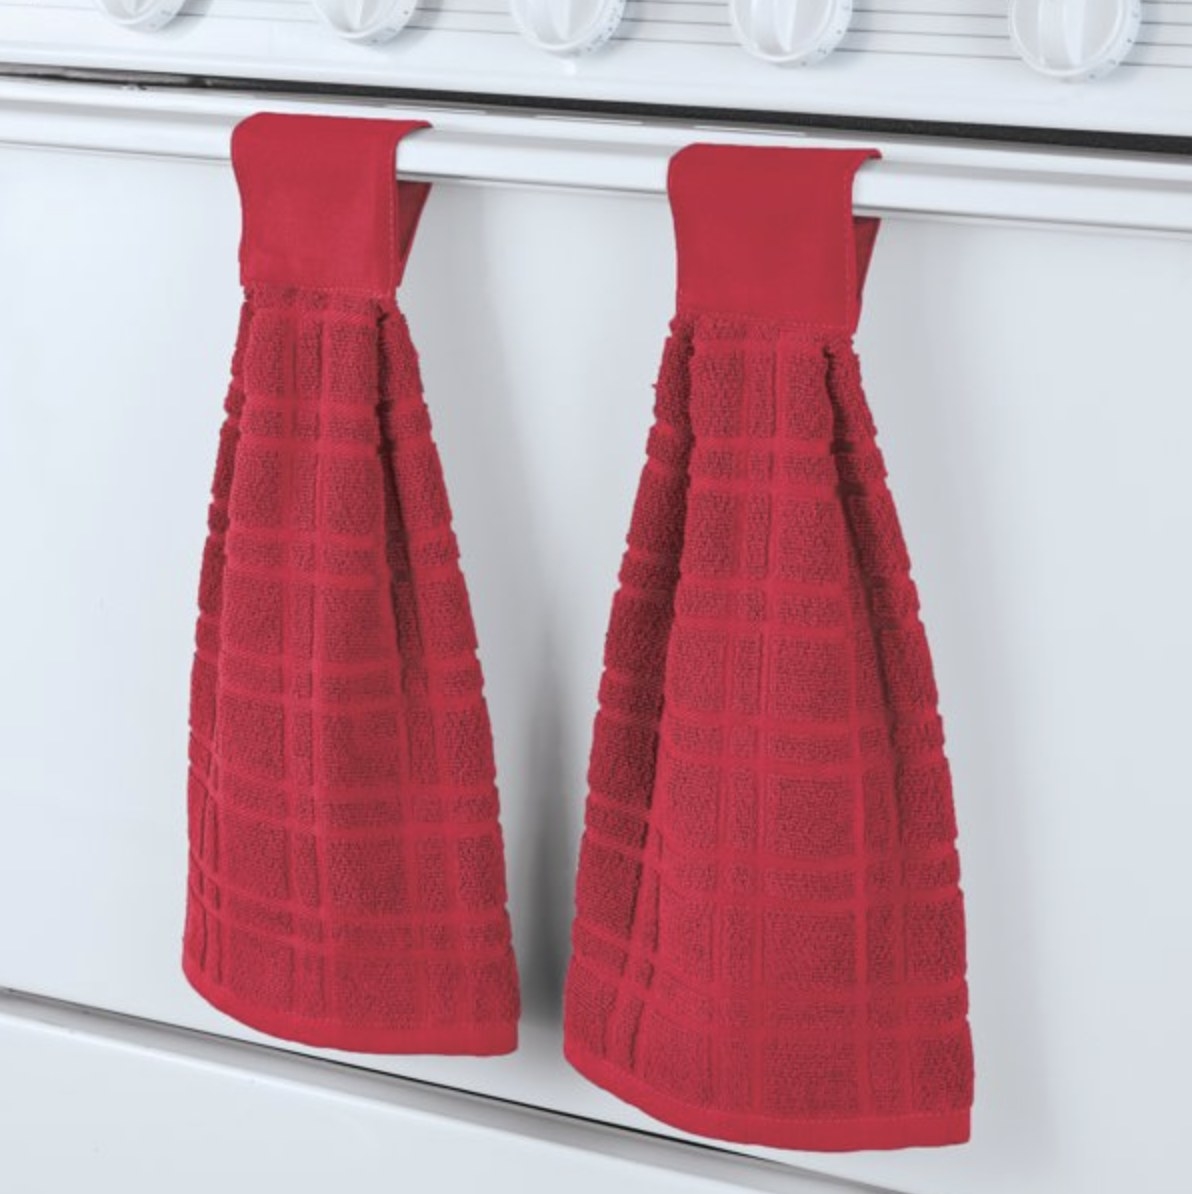 The towels hanging from the oven handle